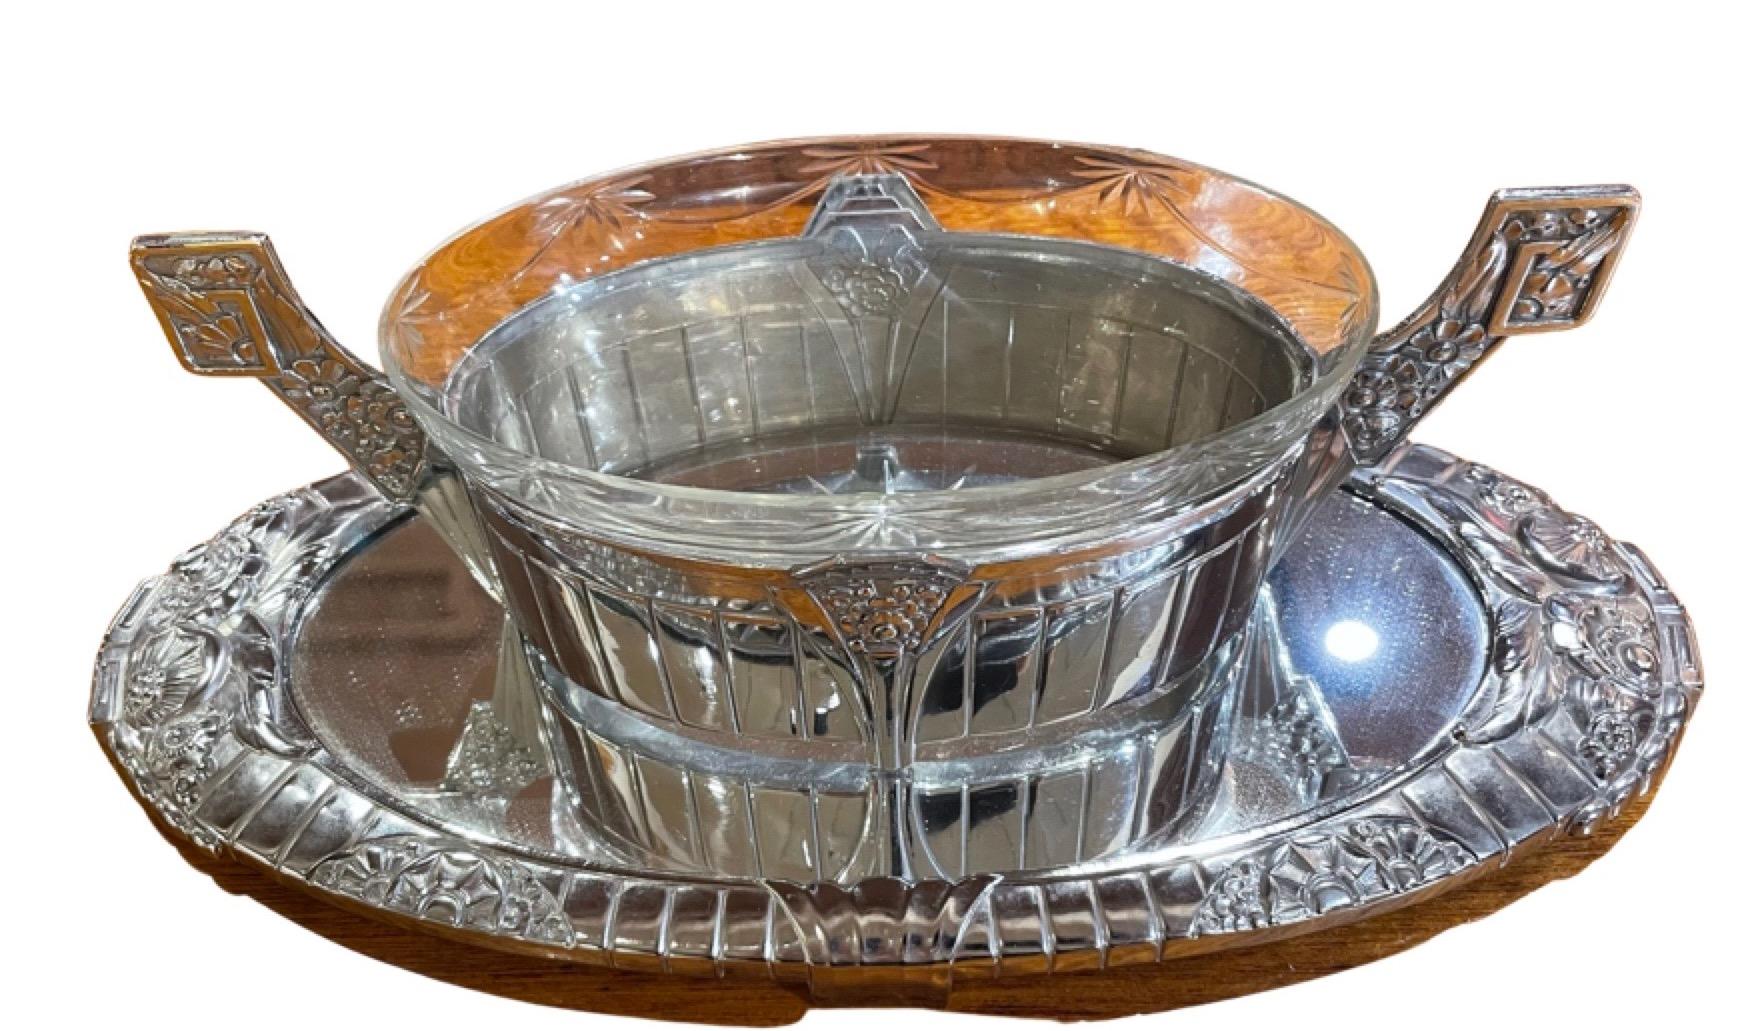 A silver and mirrored centerpiece, elaborate and ornamental from the late 1920s. The great metalwork was created by Orfevrerie Dilecta, a French company that specialized in these pieces (often called Jardinieres). They began production in the Art